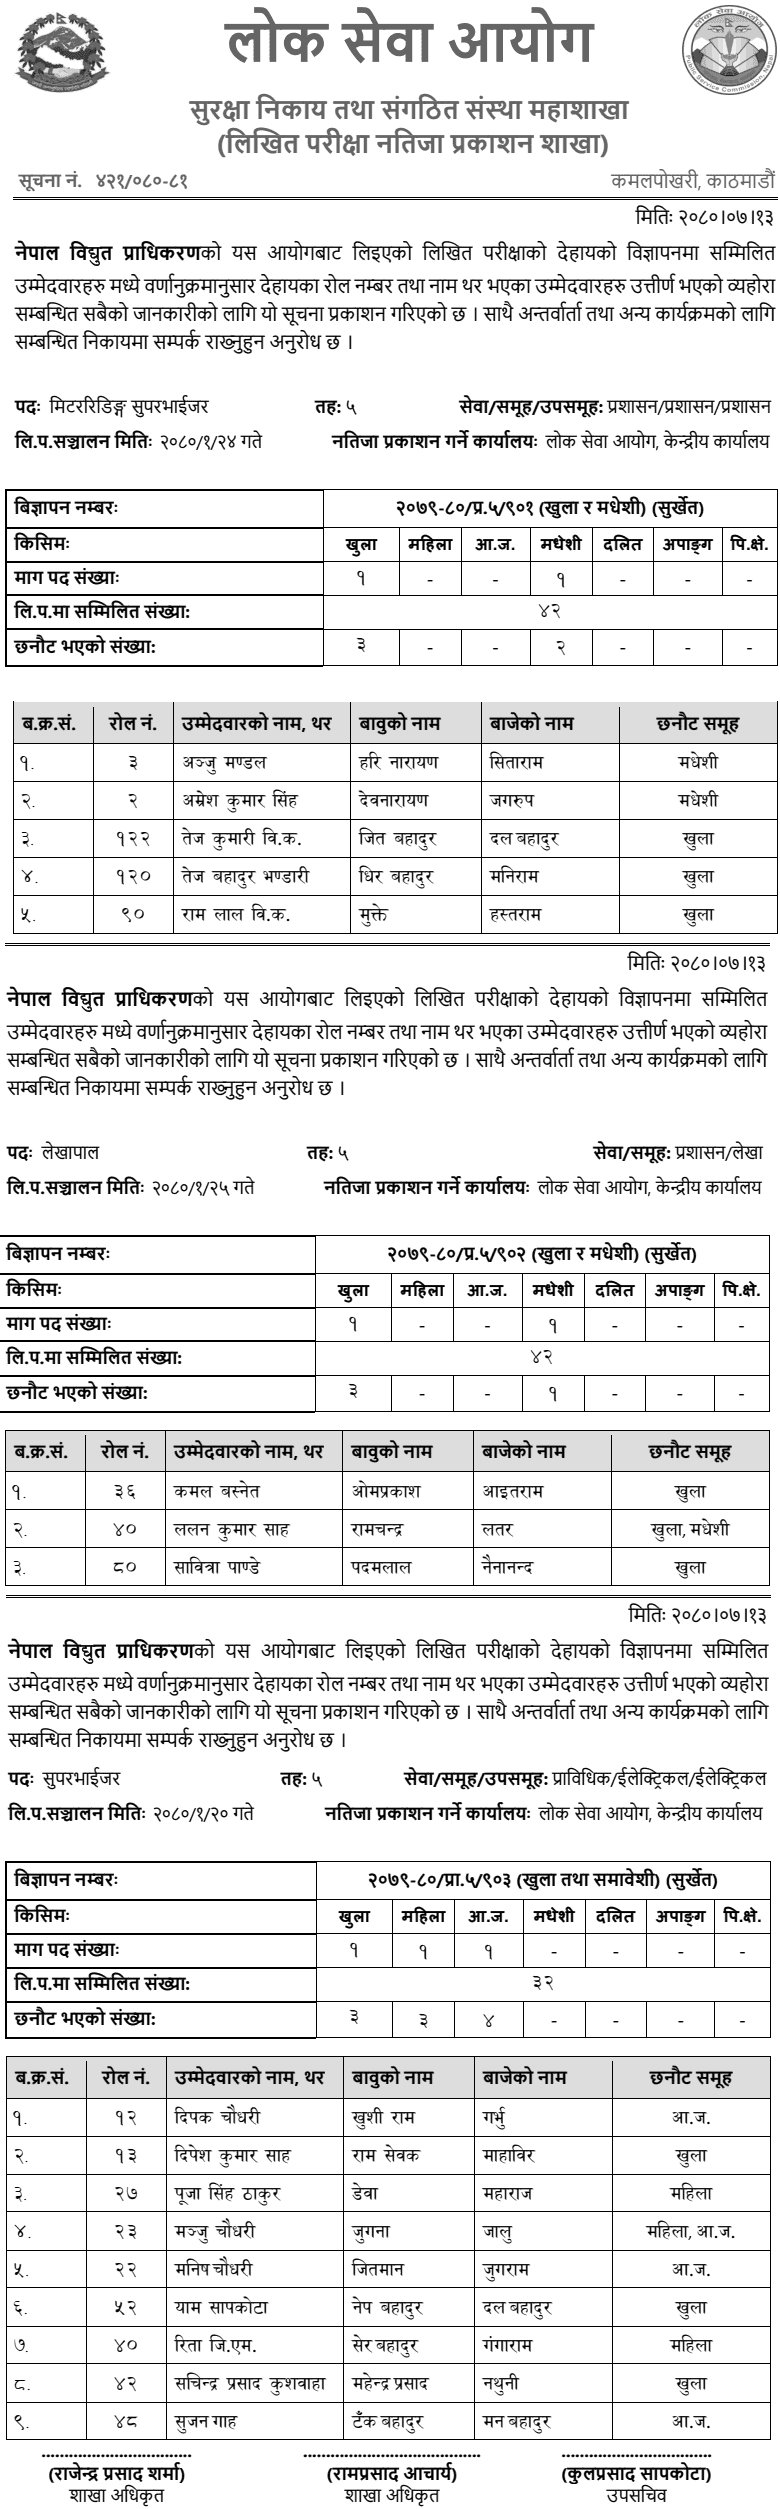 NEA Nepal Electricity Authority Written Exam Results of 5th Level Assistant (Surkhet)